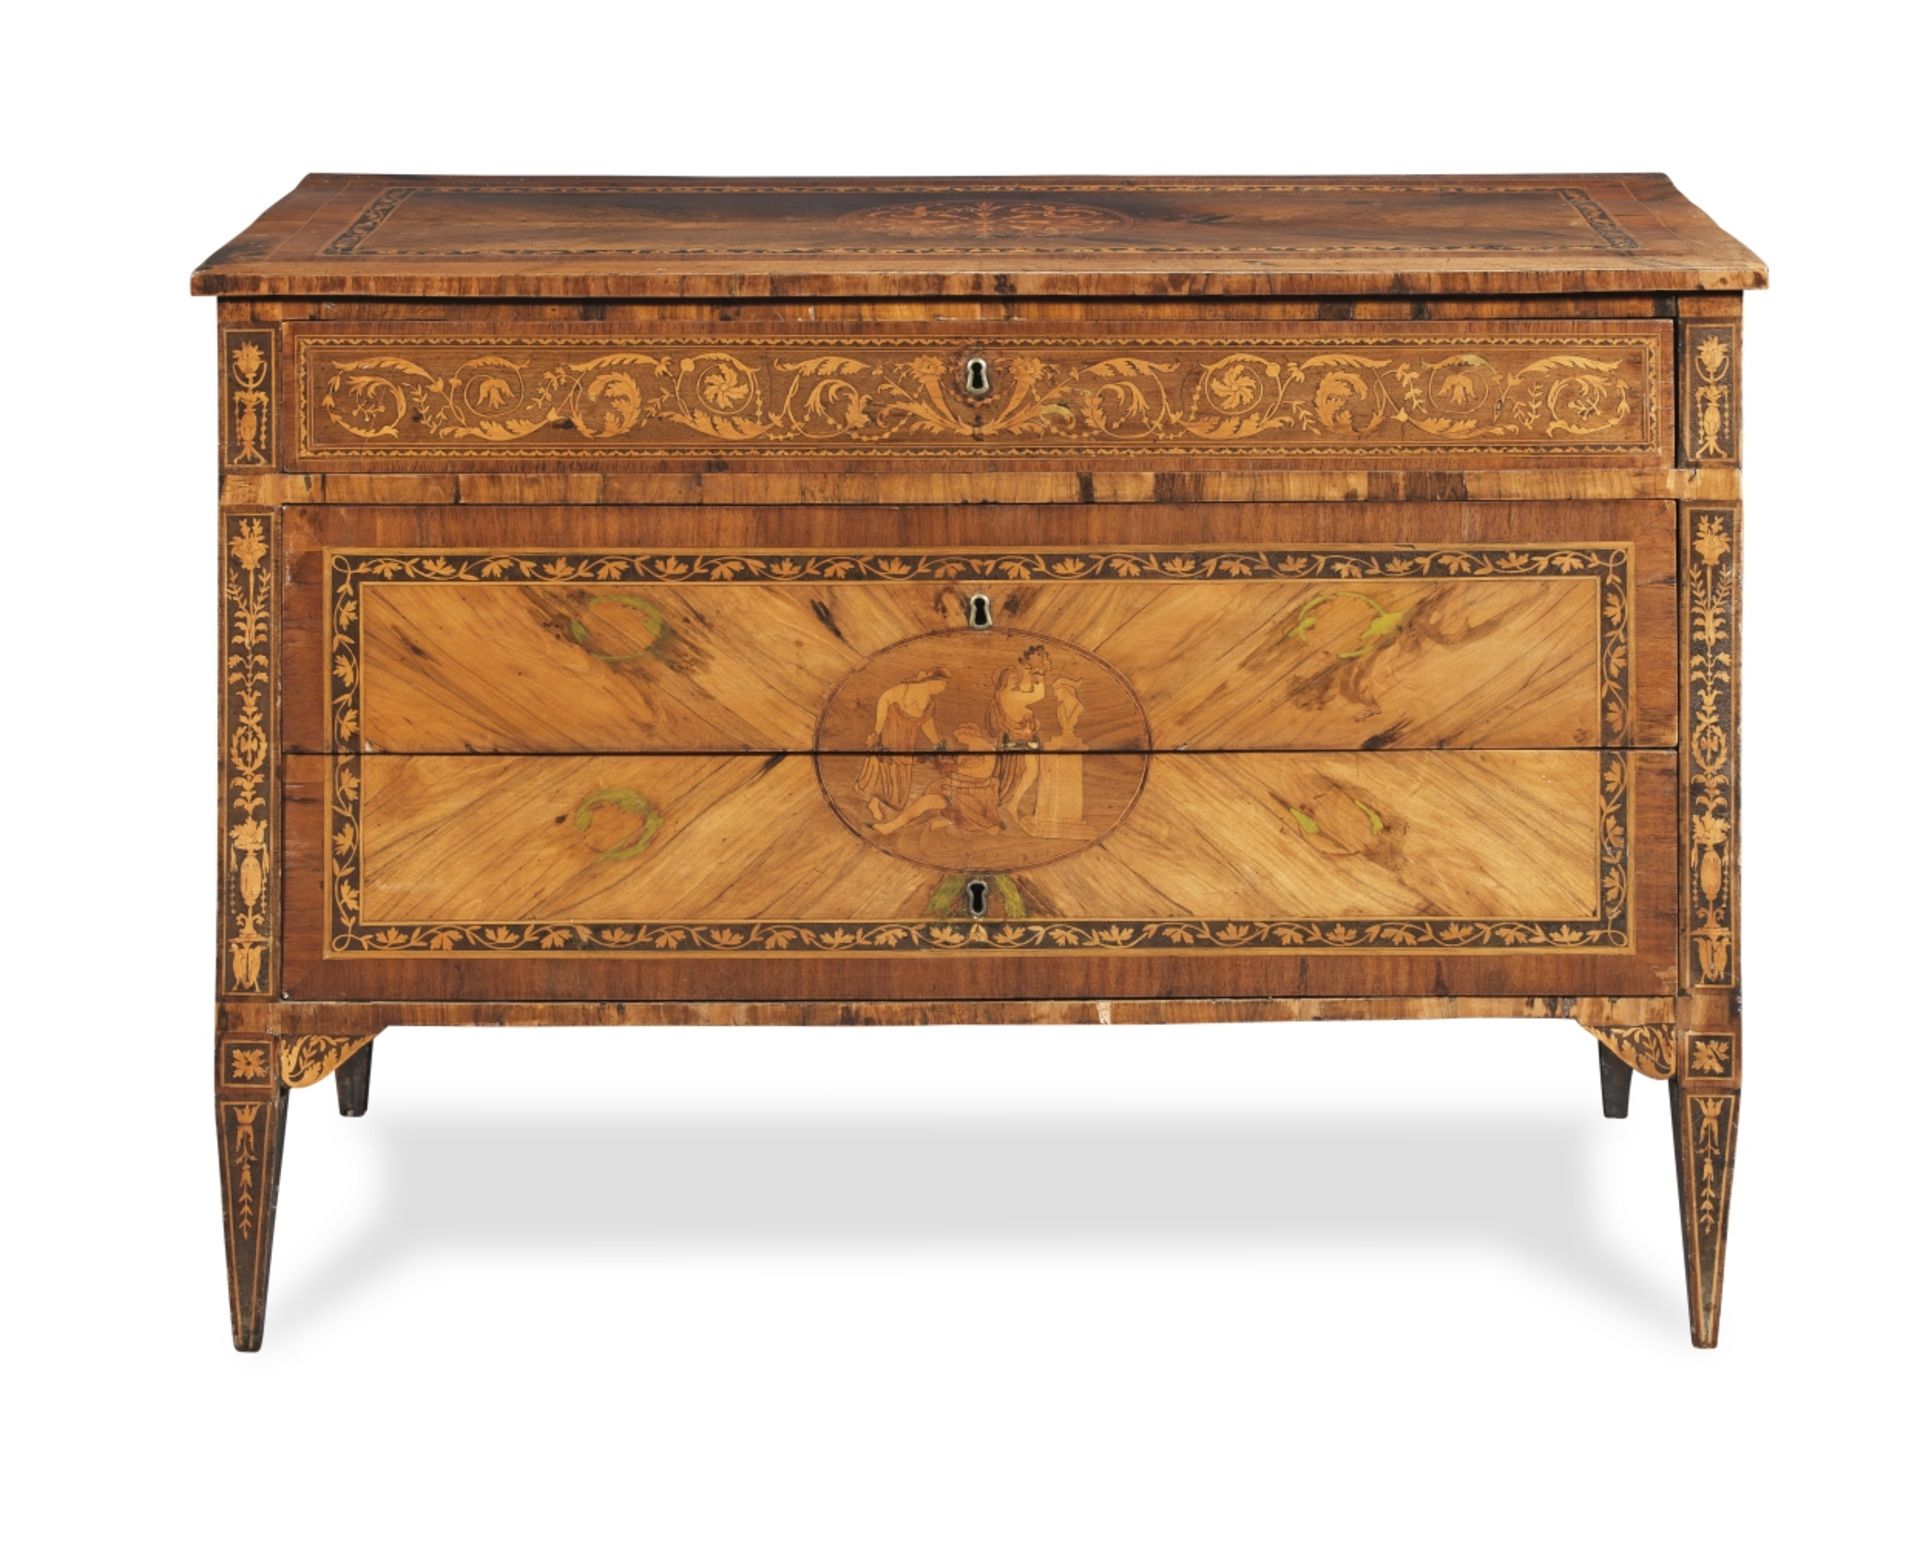 An Italian late 18th/early 19th century rosewood, bois satine, walnut, 'pastiglia' and fruitwood ...